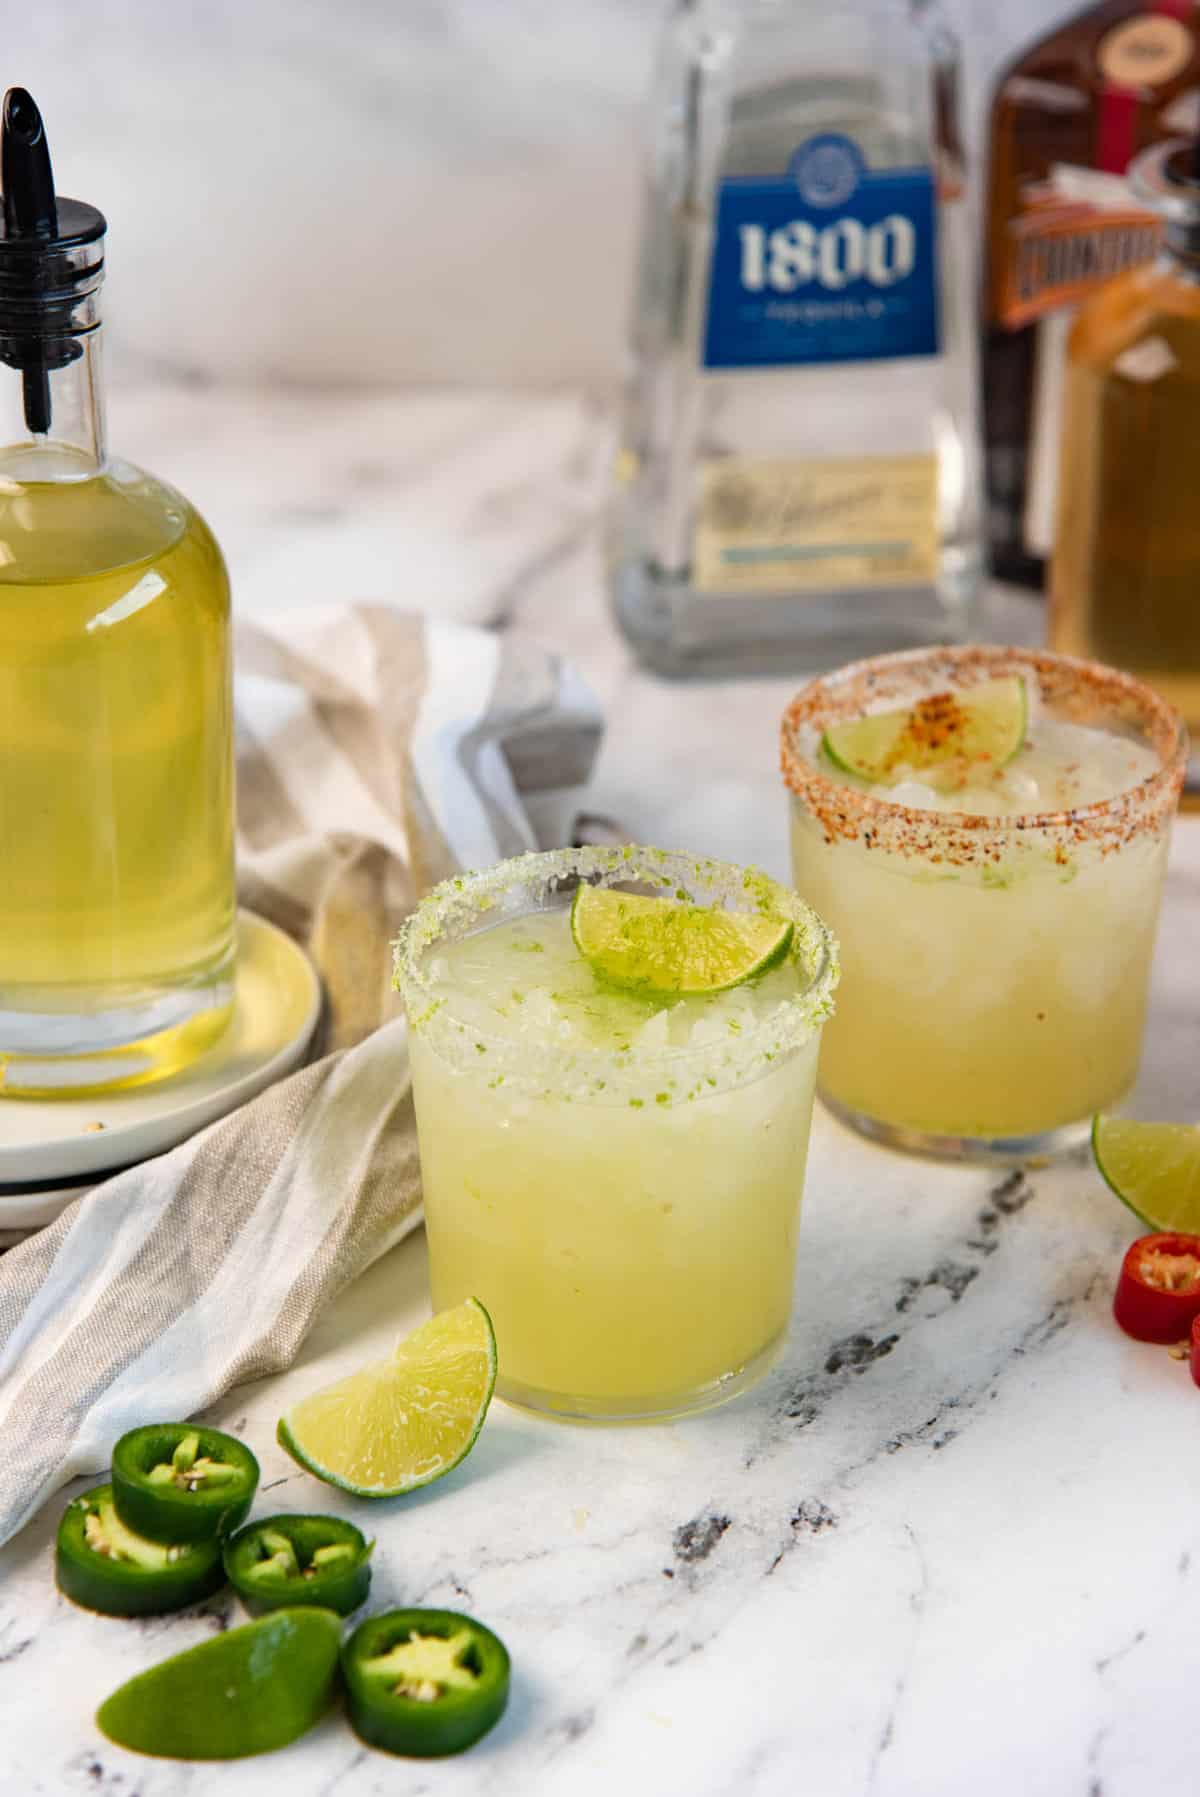 Two glasses of spicy margaritas, made with spicy simple syrup, with slices jalapeno and lime in the foreground.